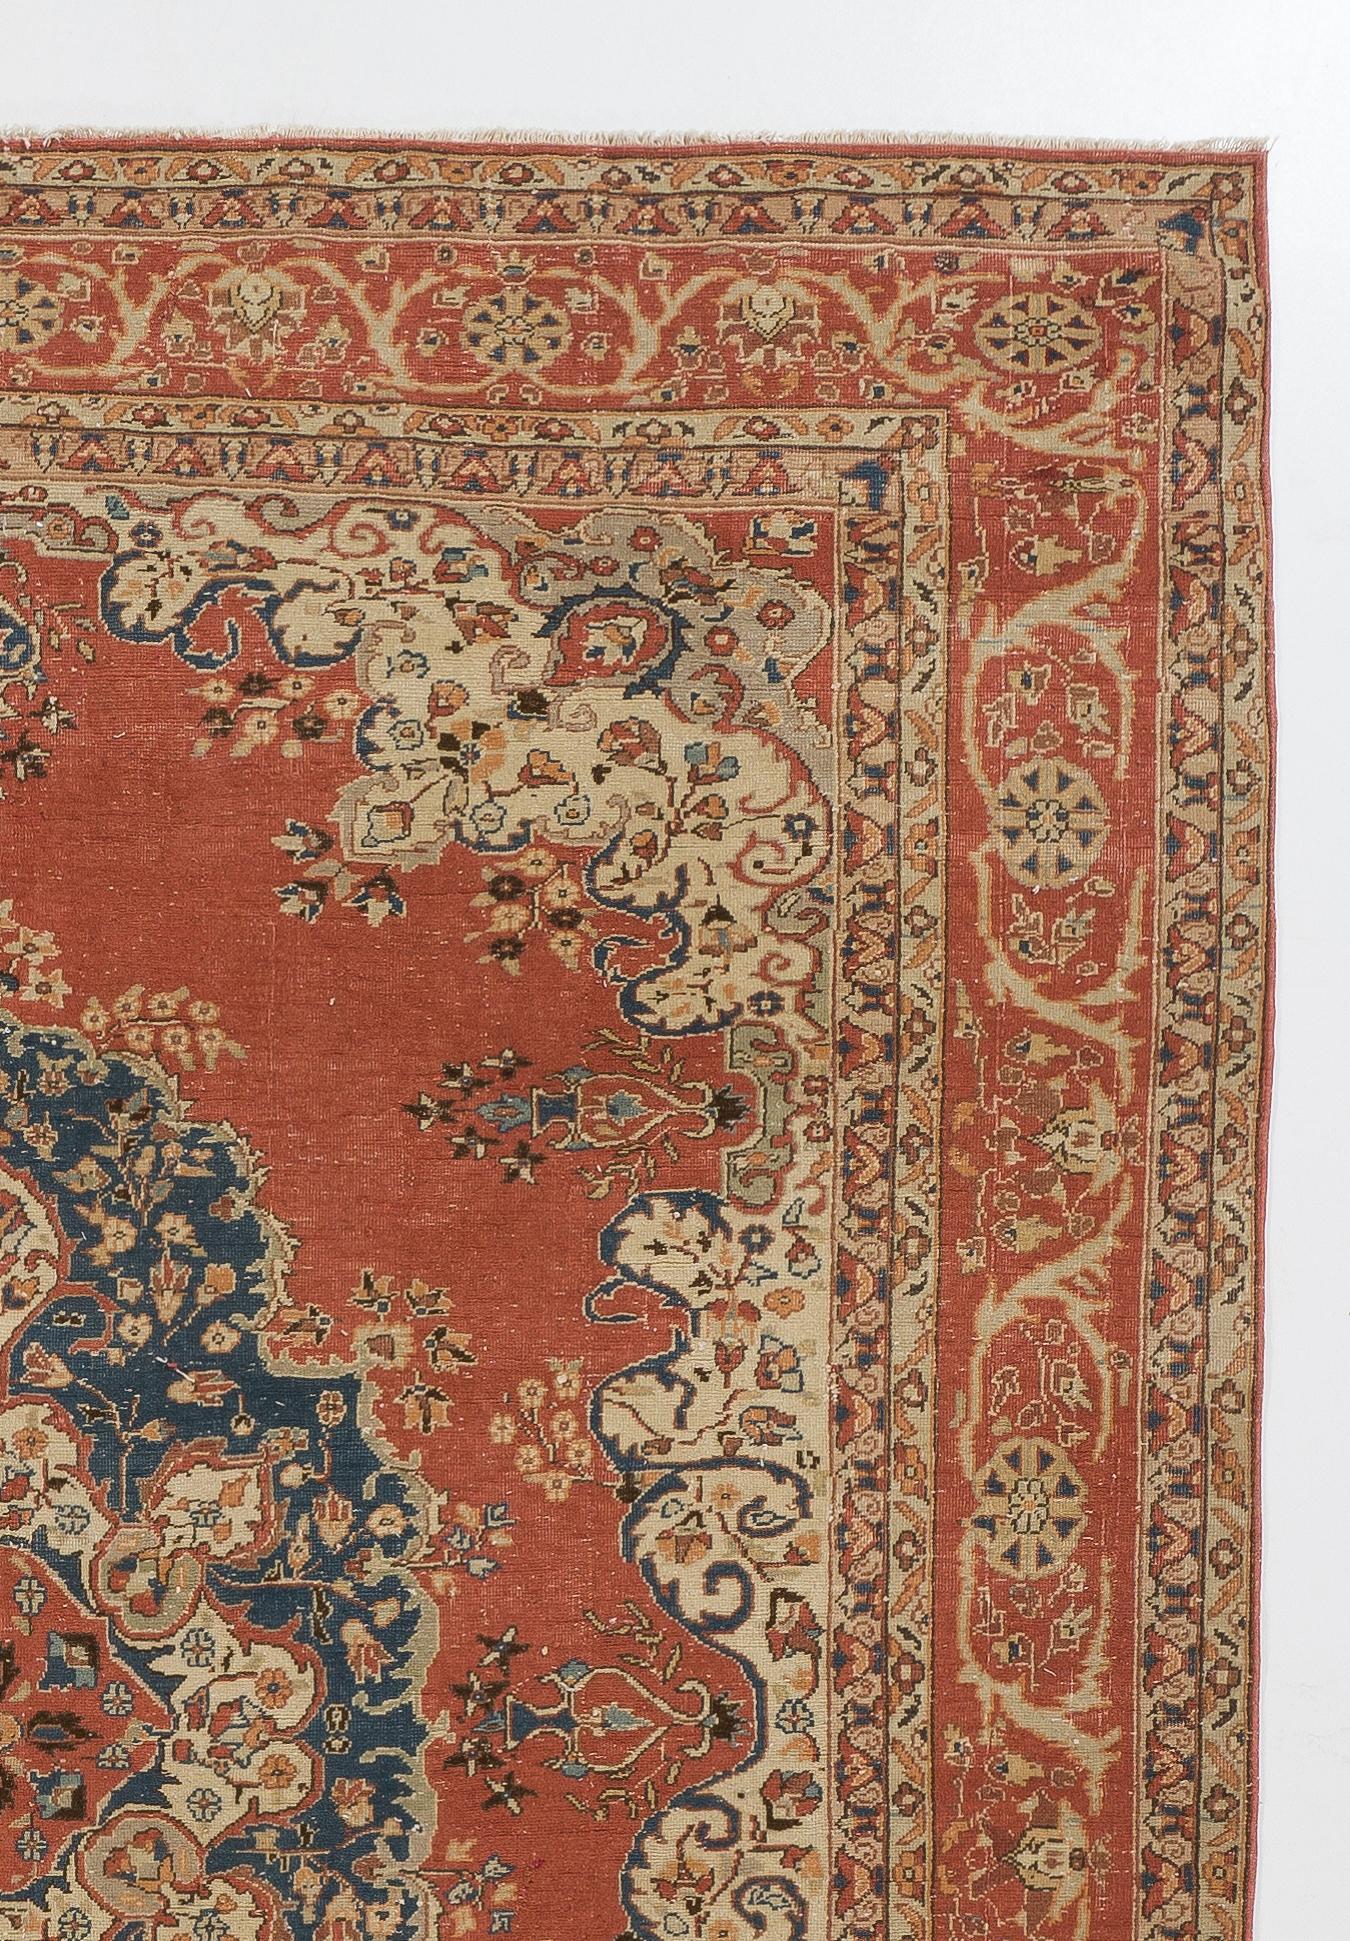 7x10 Ft Fantastic Vintage Turkish Ladik Rug in Brick Red, Blue and Beige Colors In Good Condition For Sale In Philadelphia, PA